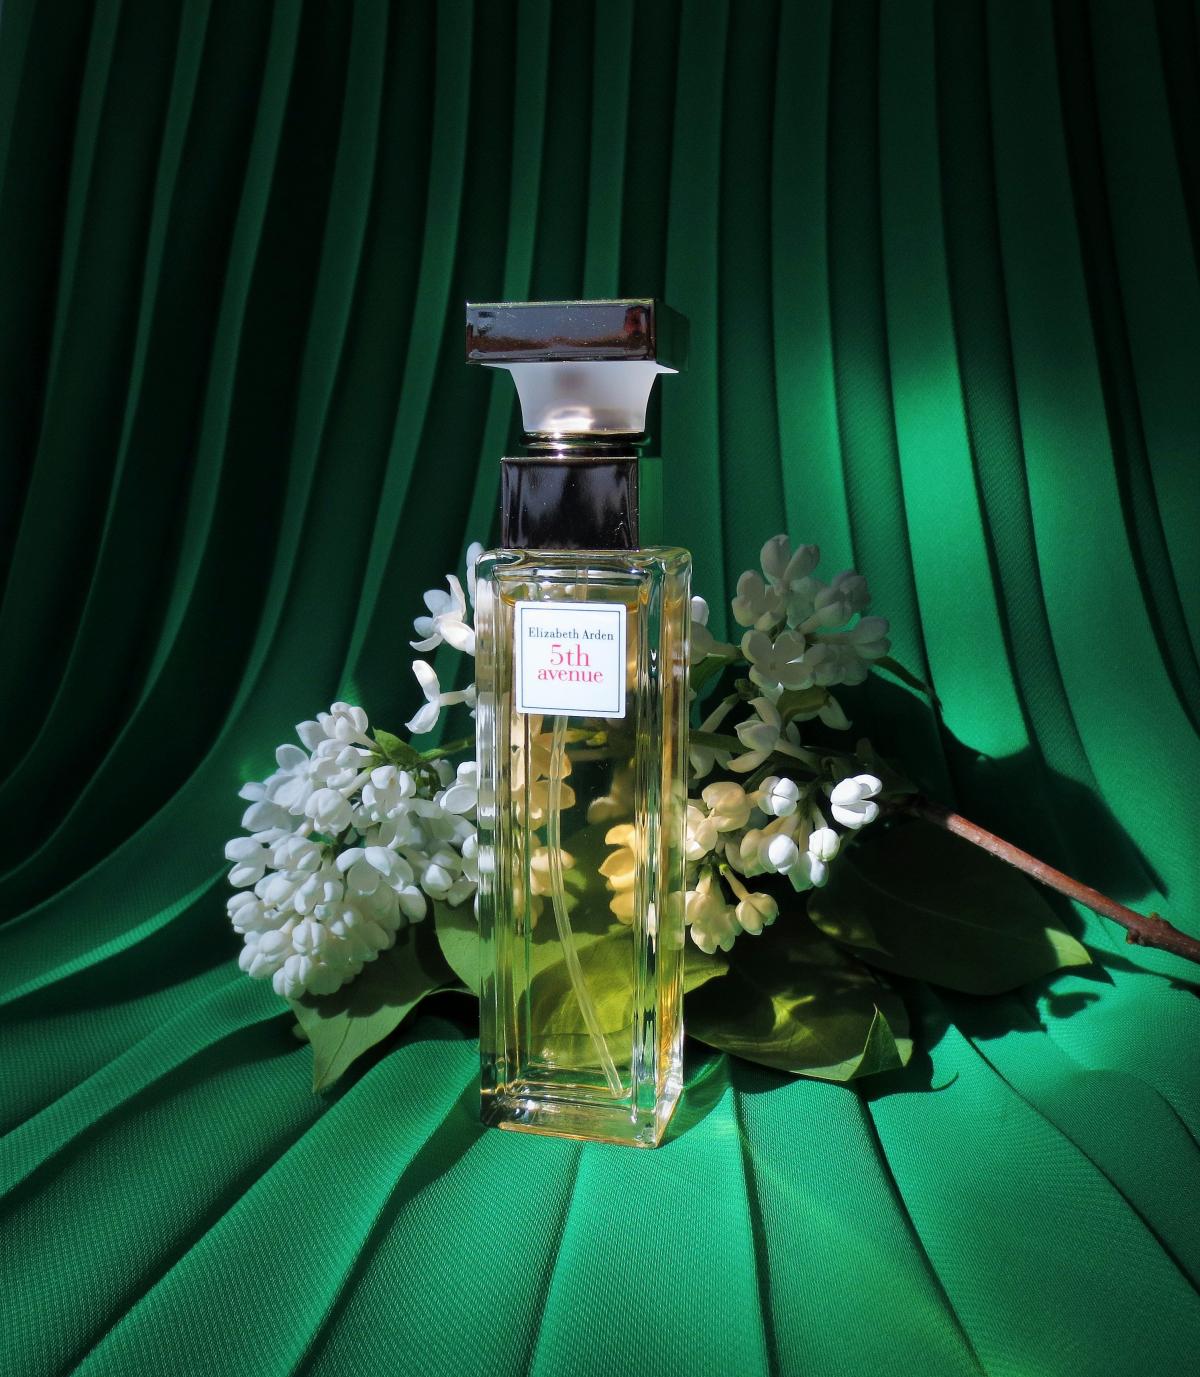 Fragrantica Best in Show: The Perfumes of Jacques Cavallier 